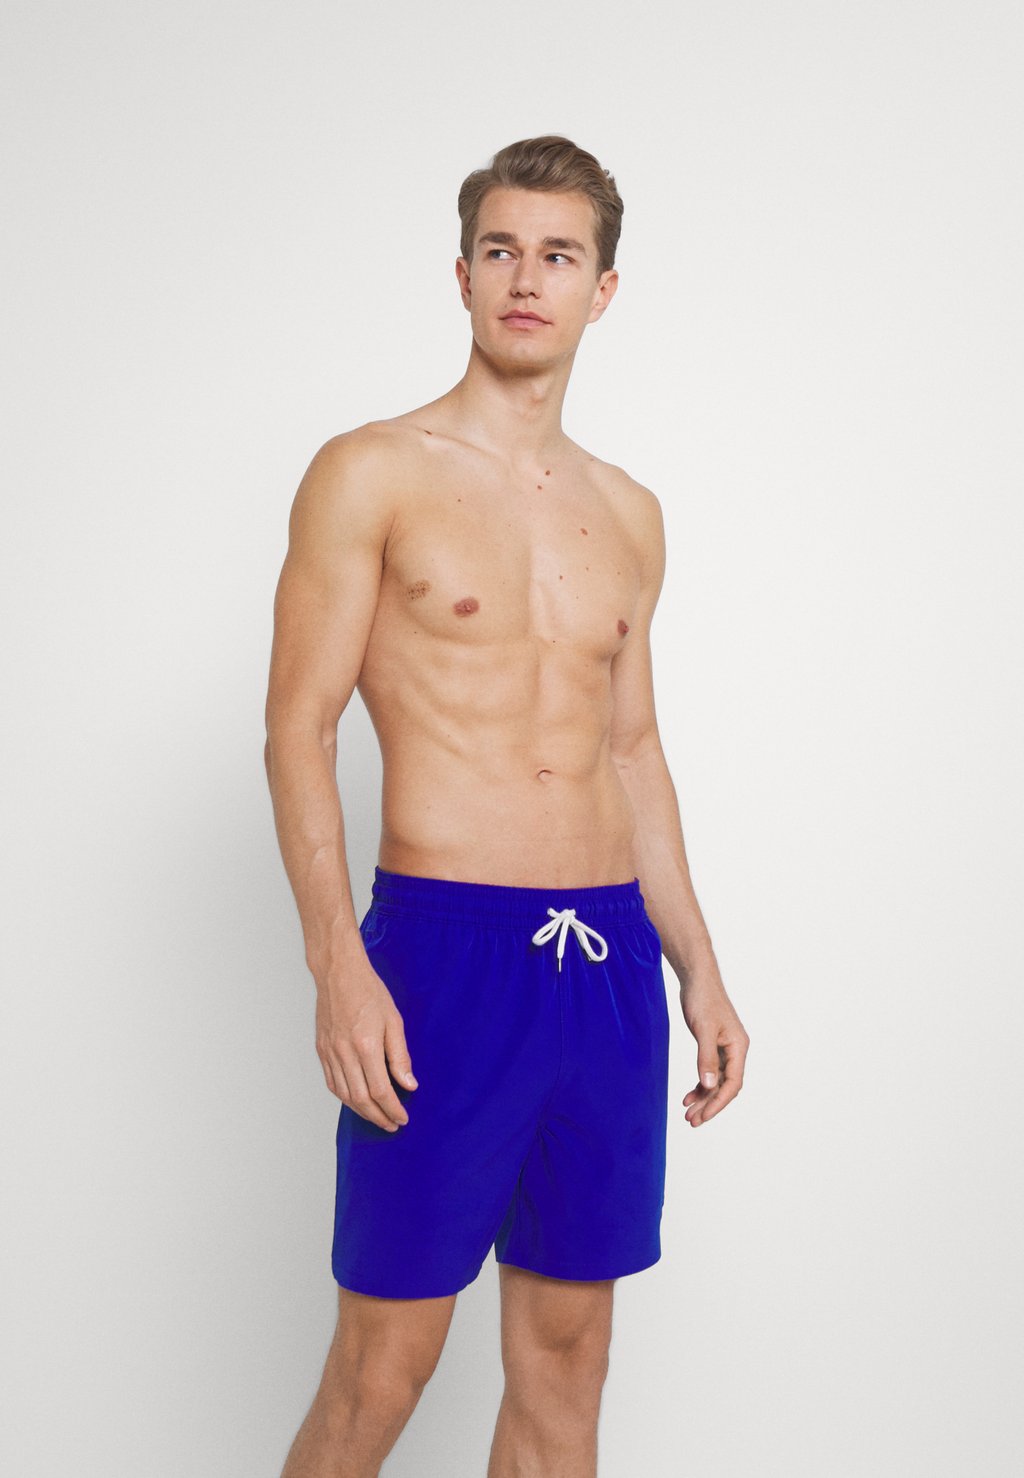 Шорты для плавания 5.75-INCH TRAVELER CLASSIC SWIM TRUNK Polo Ralph Lauren, цвет rugby royal 2020 panthers melbourne storm rabbitohs maori broncos roosters eels rugby jersey rugby polo